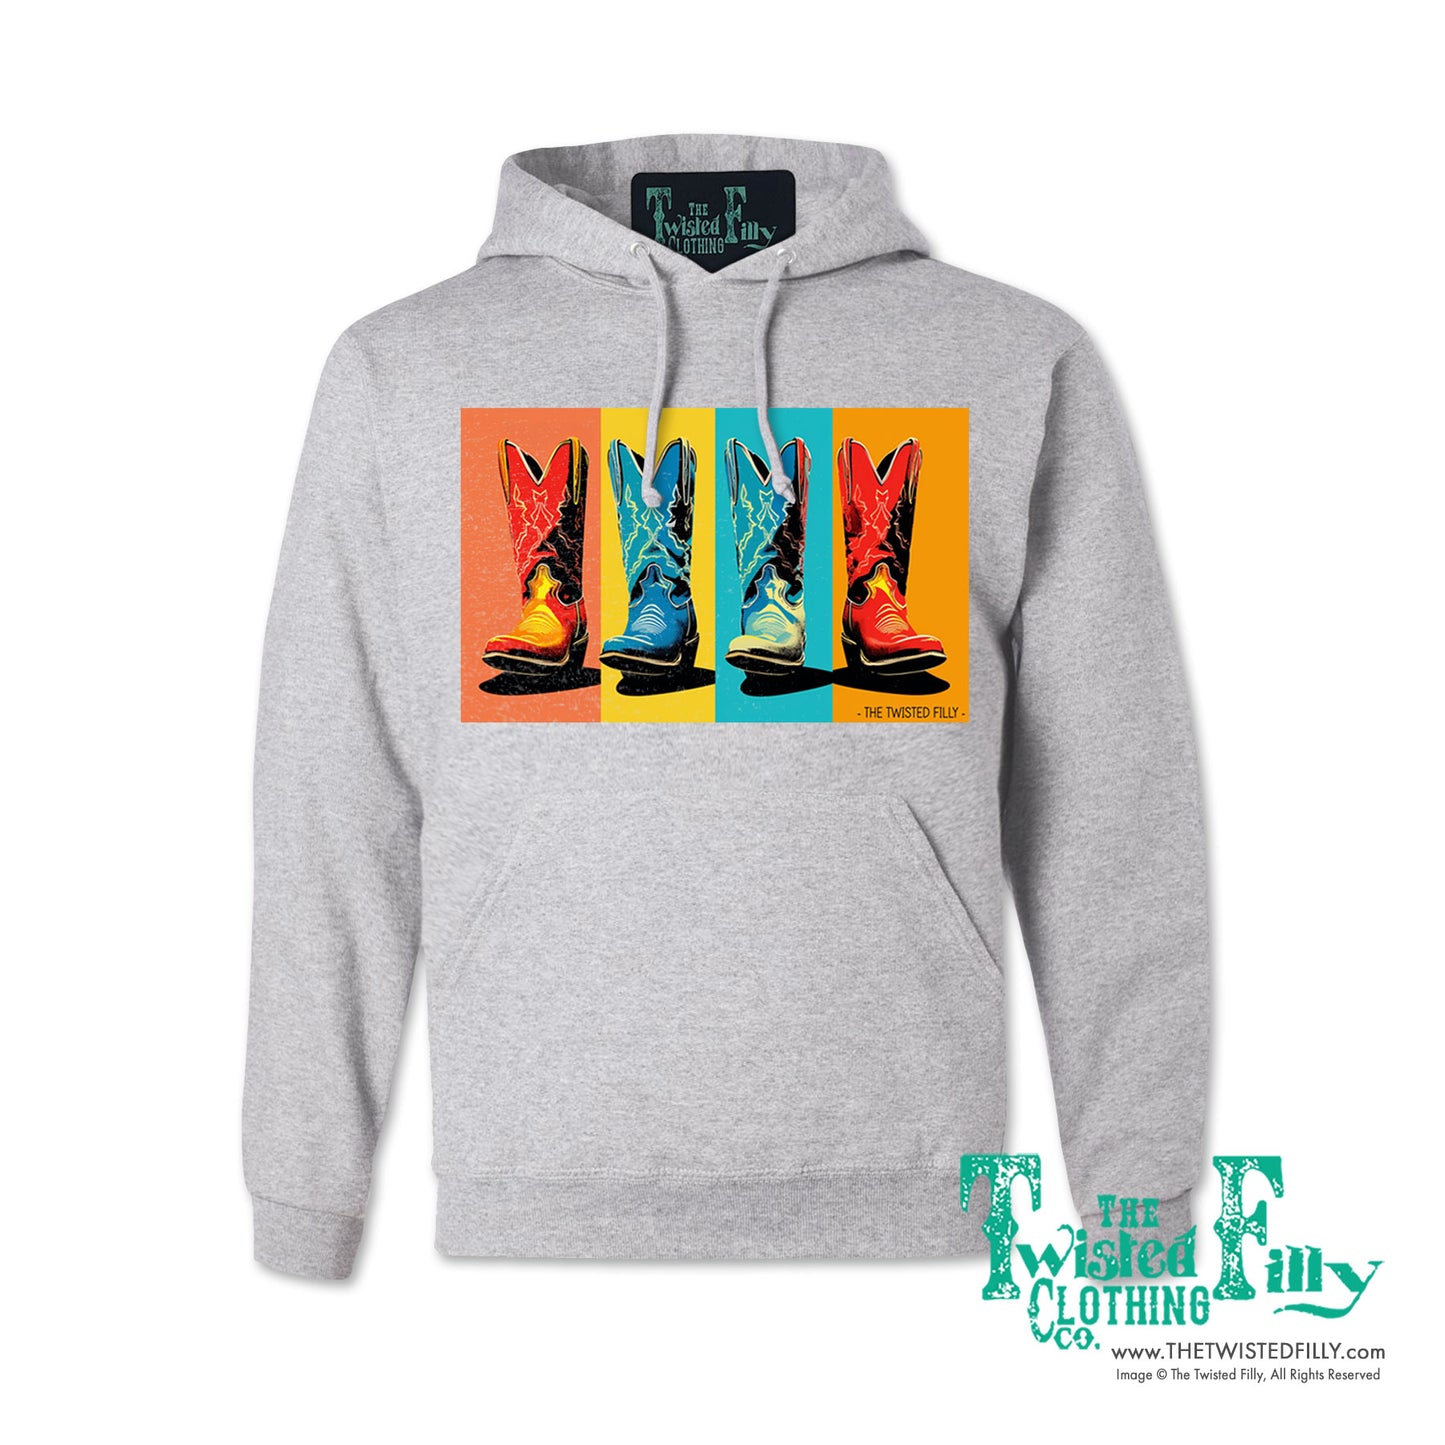 The Boots - Adult Hoodie - Assorted Colors